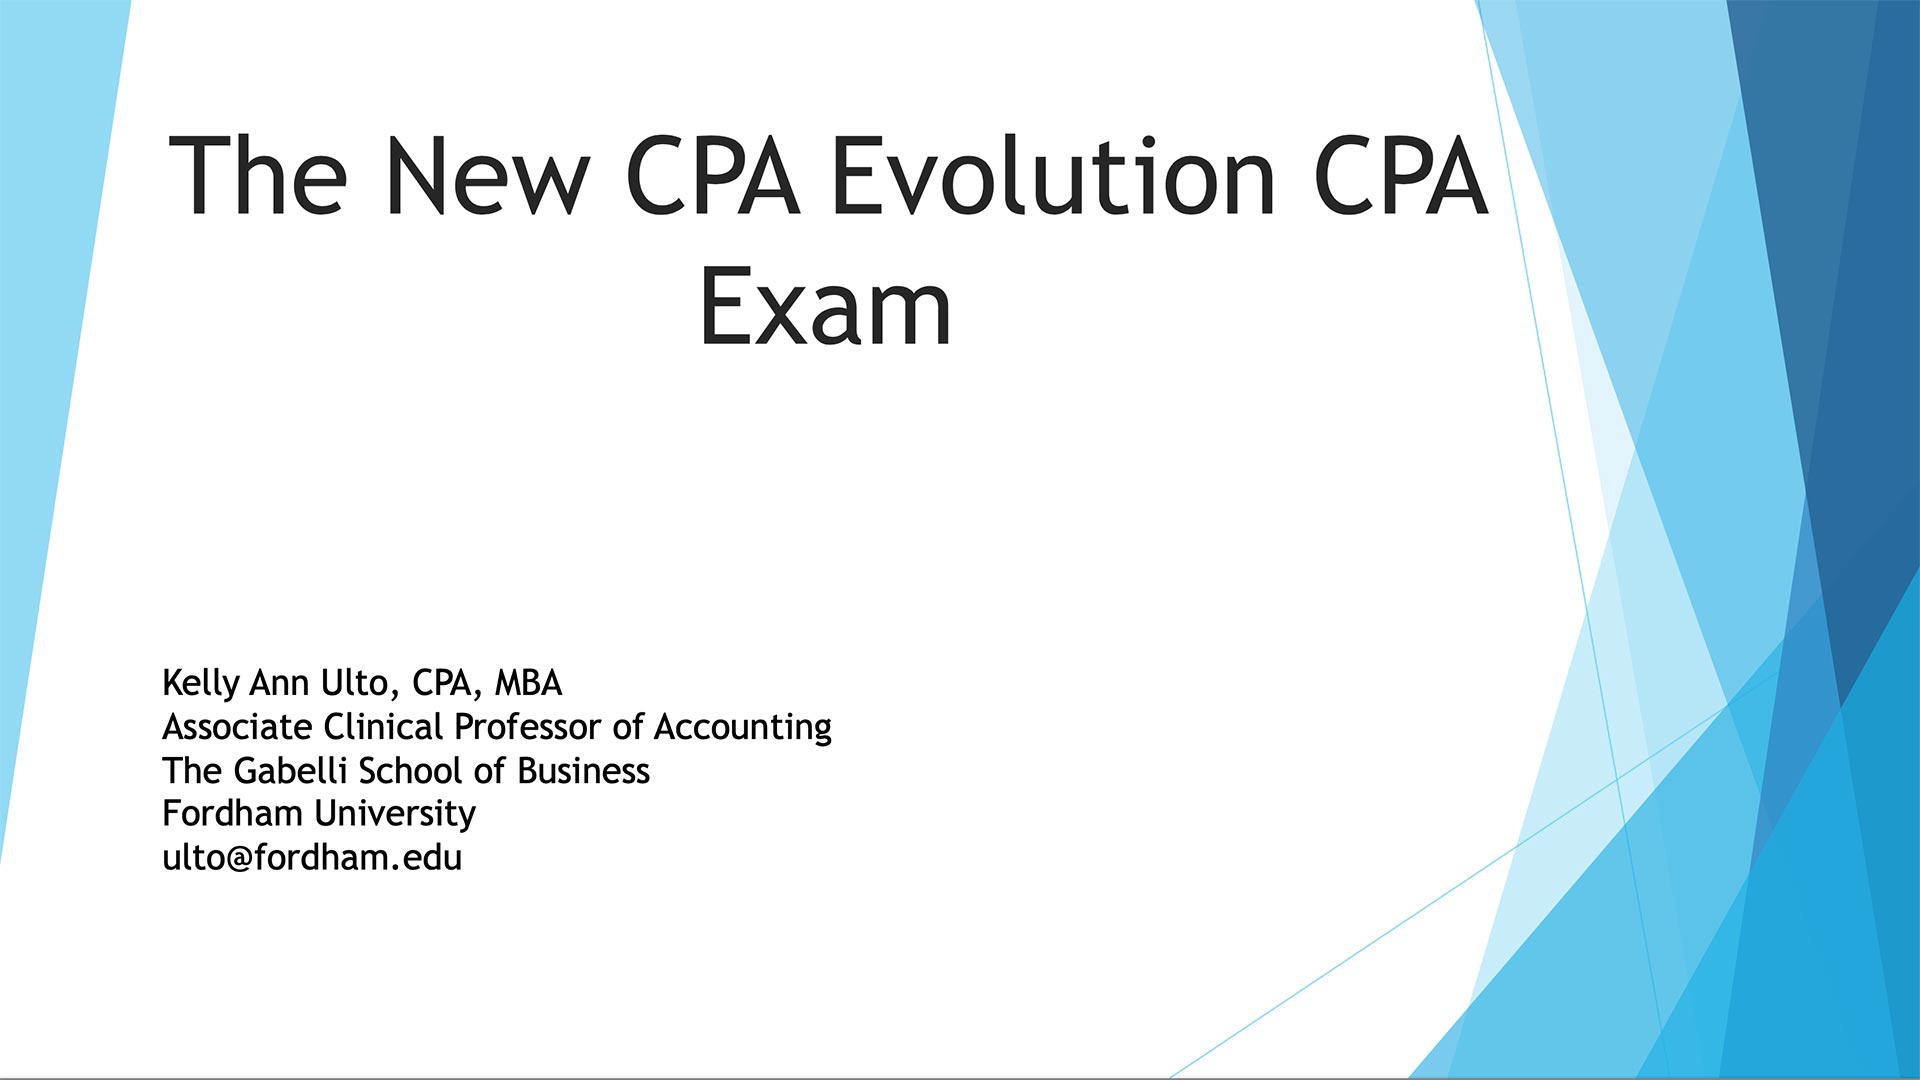 Topic: What the US CPA education path is changing with CPA Evolution starting in January 2024